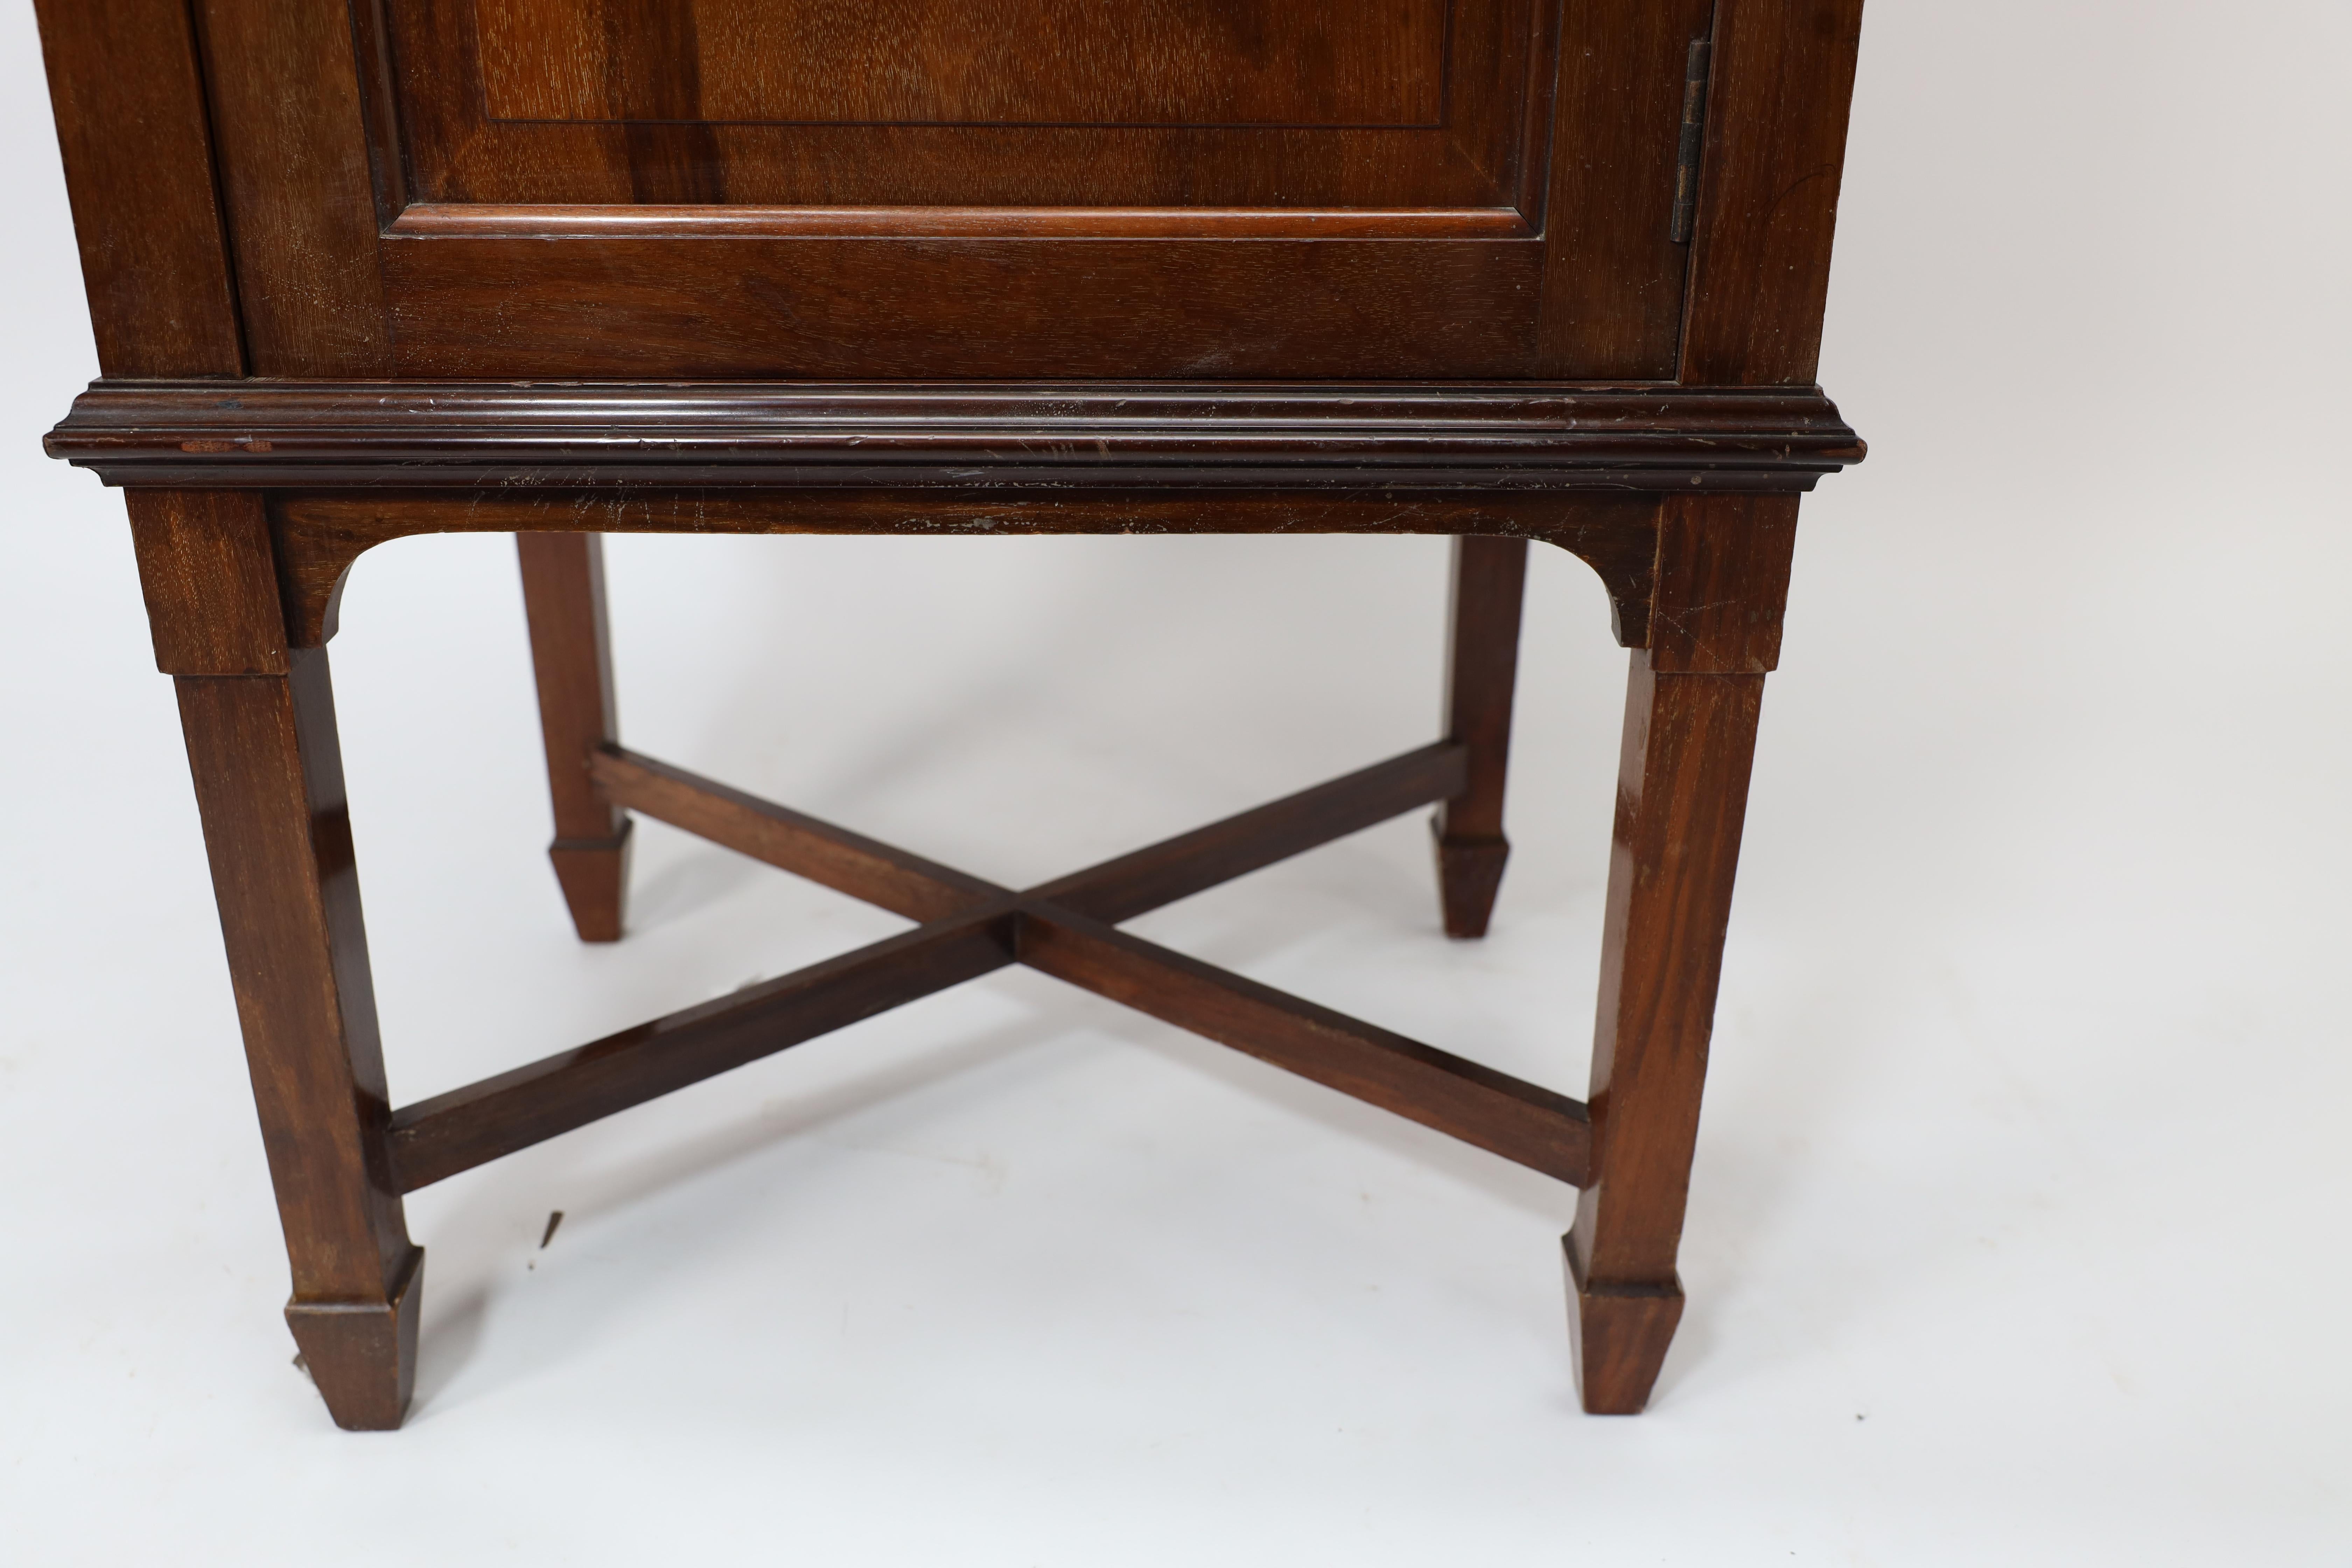 Morris and Co. A fine quality Arts & Crafts Walnut wash or shaving stand For Sale 12